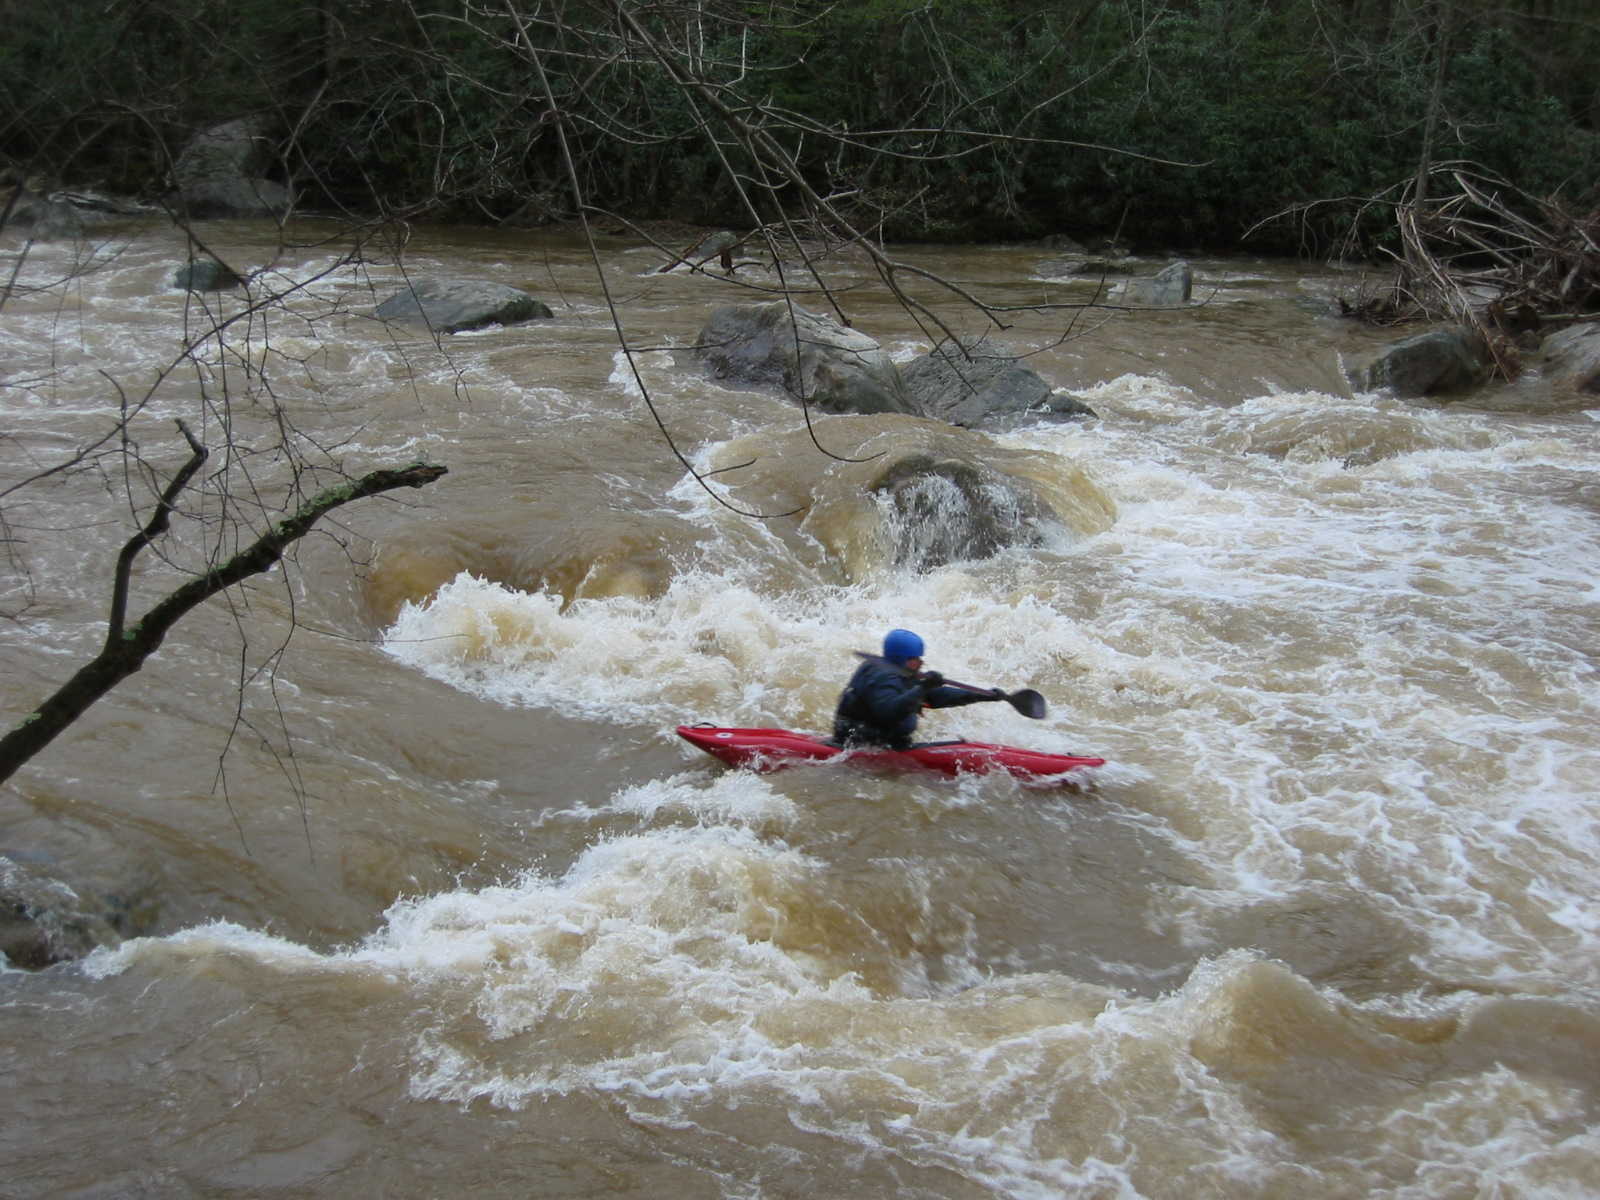 Mike Wellman in middle of the big South Fork rapid (Photo by Lou Campagna - 4/26/04)